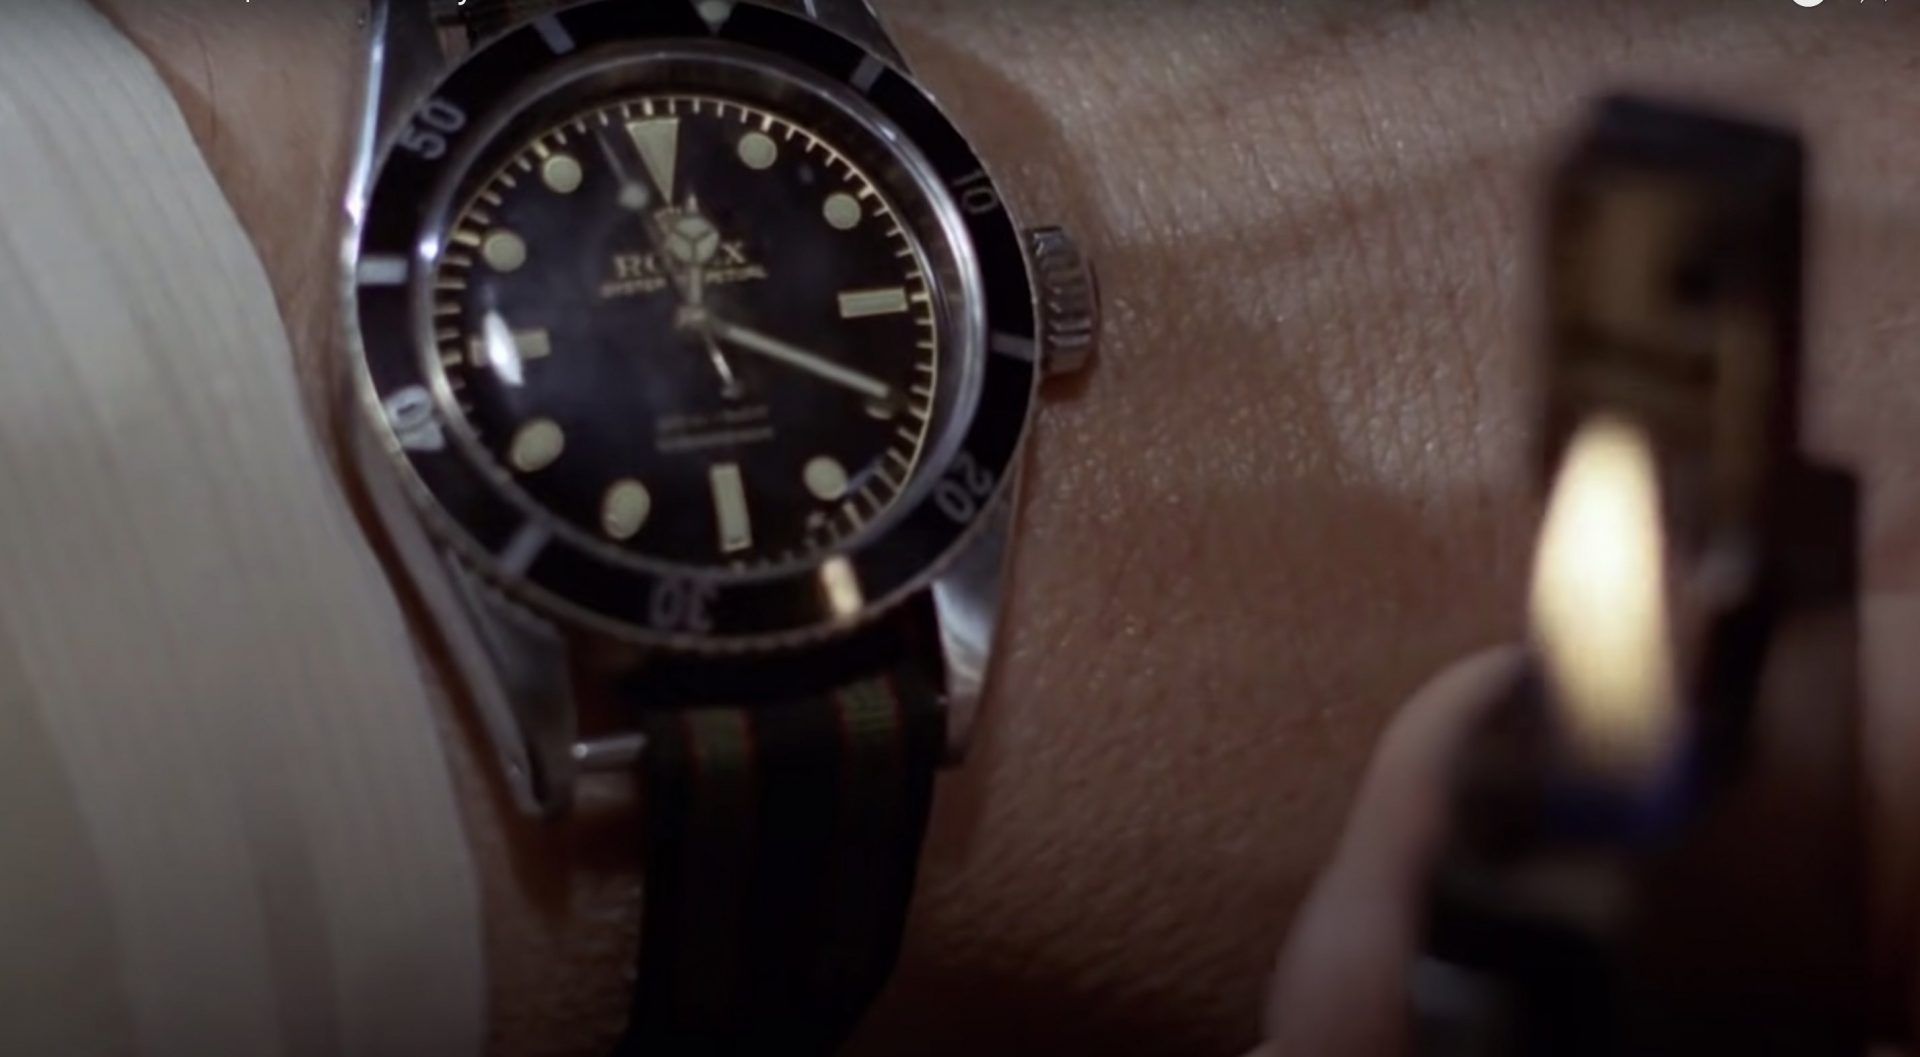 Rolex Submariner Big Crown on James Bond’s wrist in Dr. No for A Collected Man London